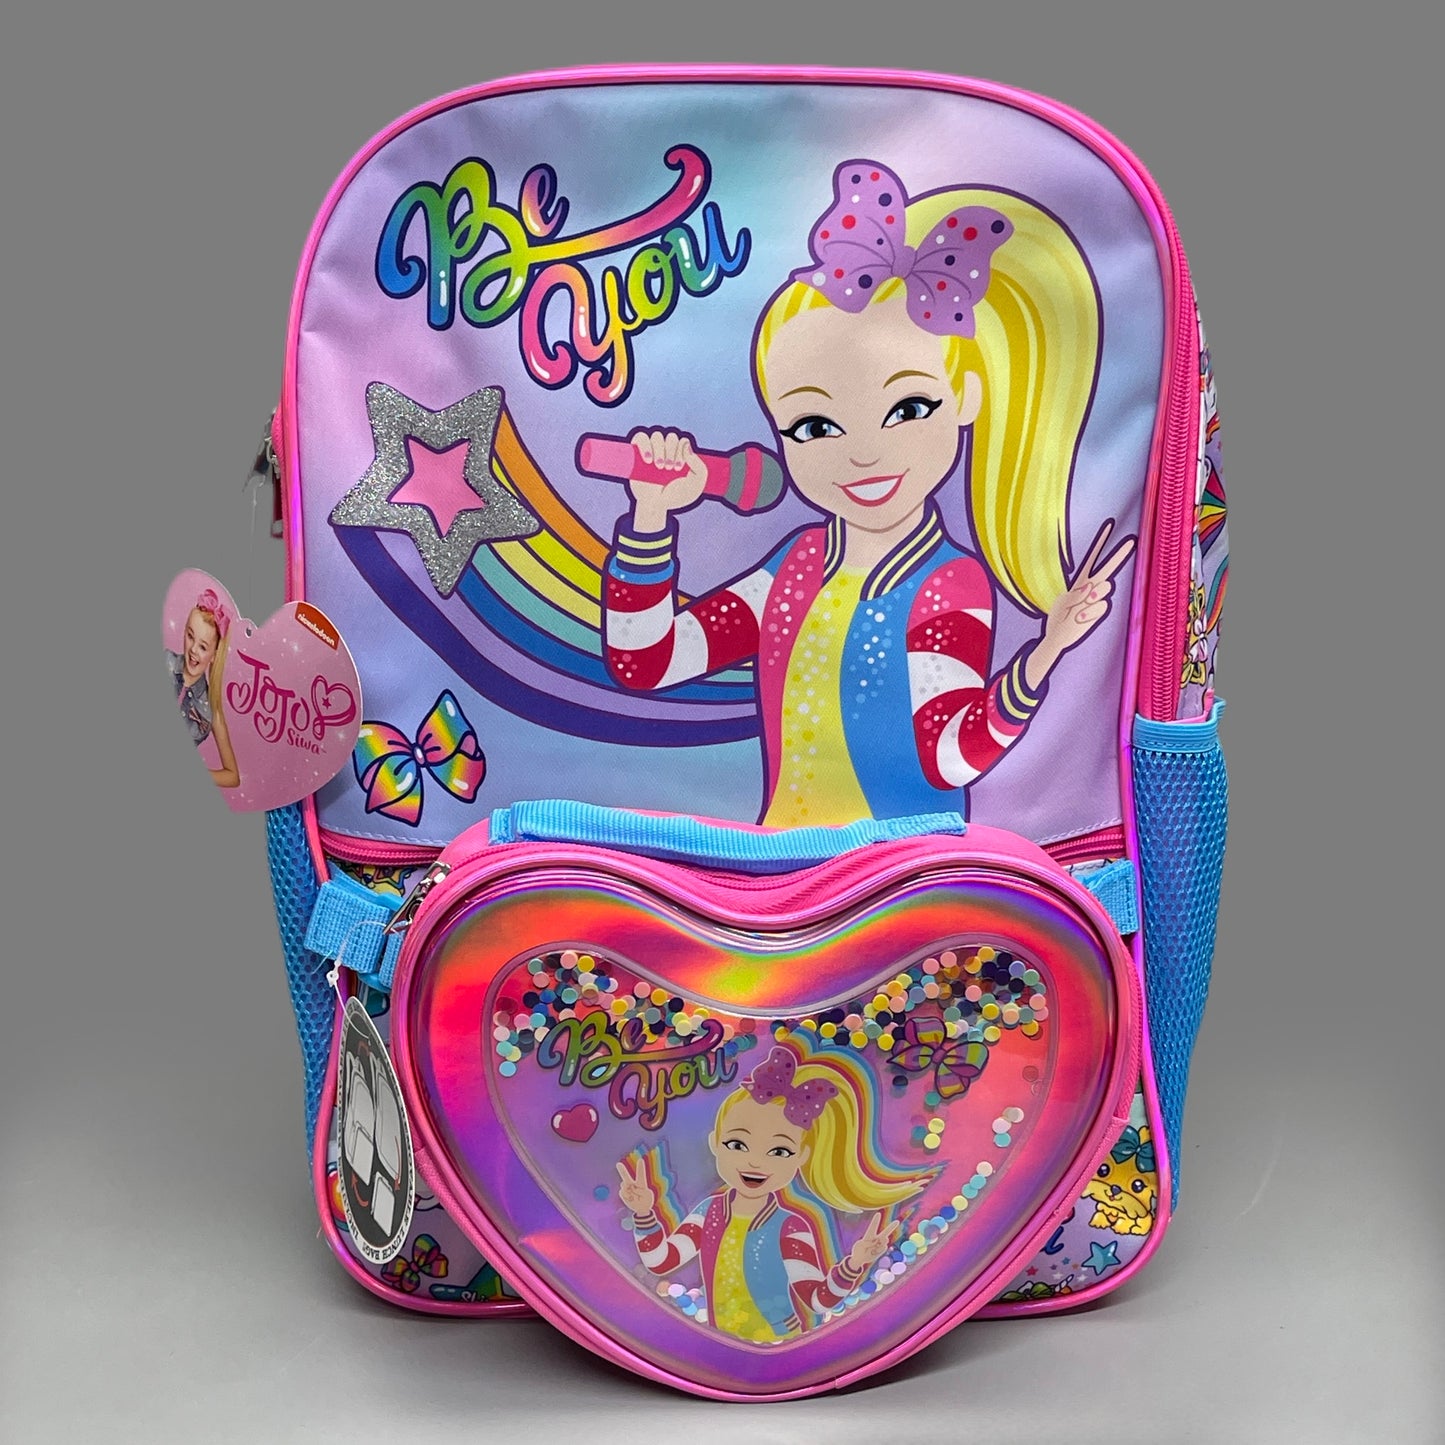 ACCESSORY INNOVATIONS JOJO Siwa Nickelodeon “Be You” Backpack & Lunch Bag Pink